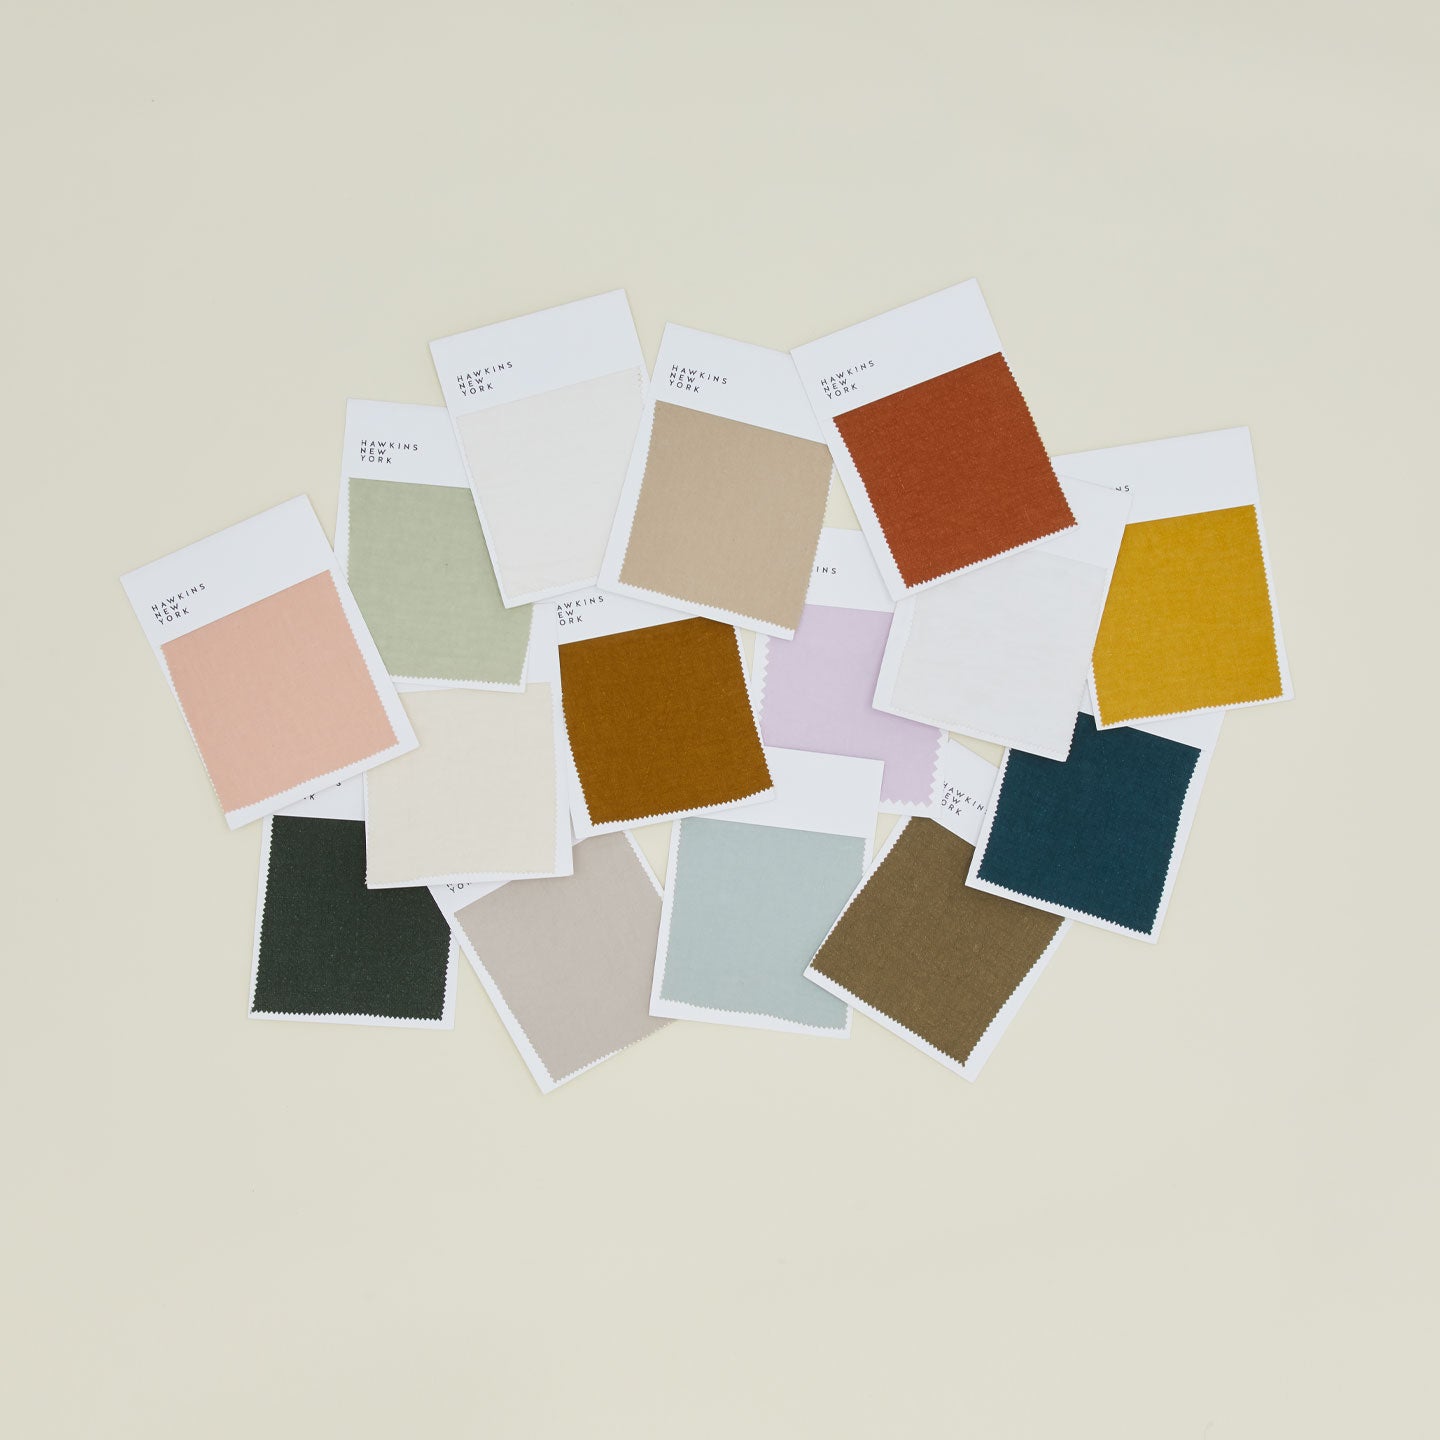 Group of Linen Swatches in various colors.